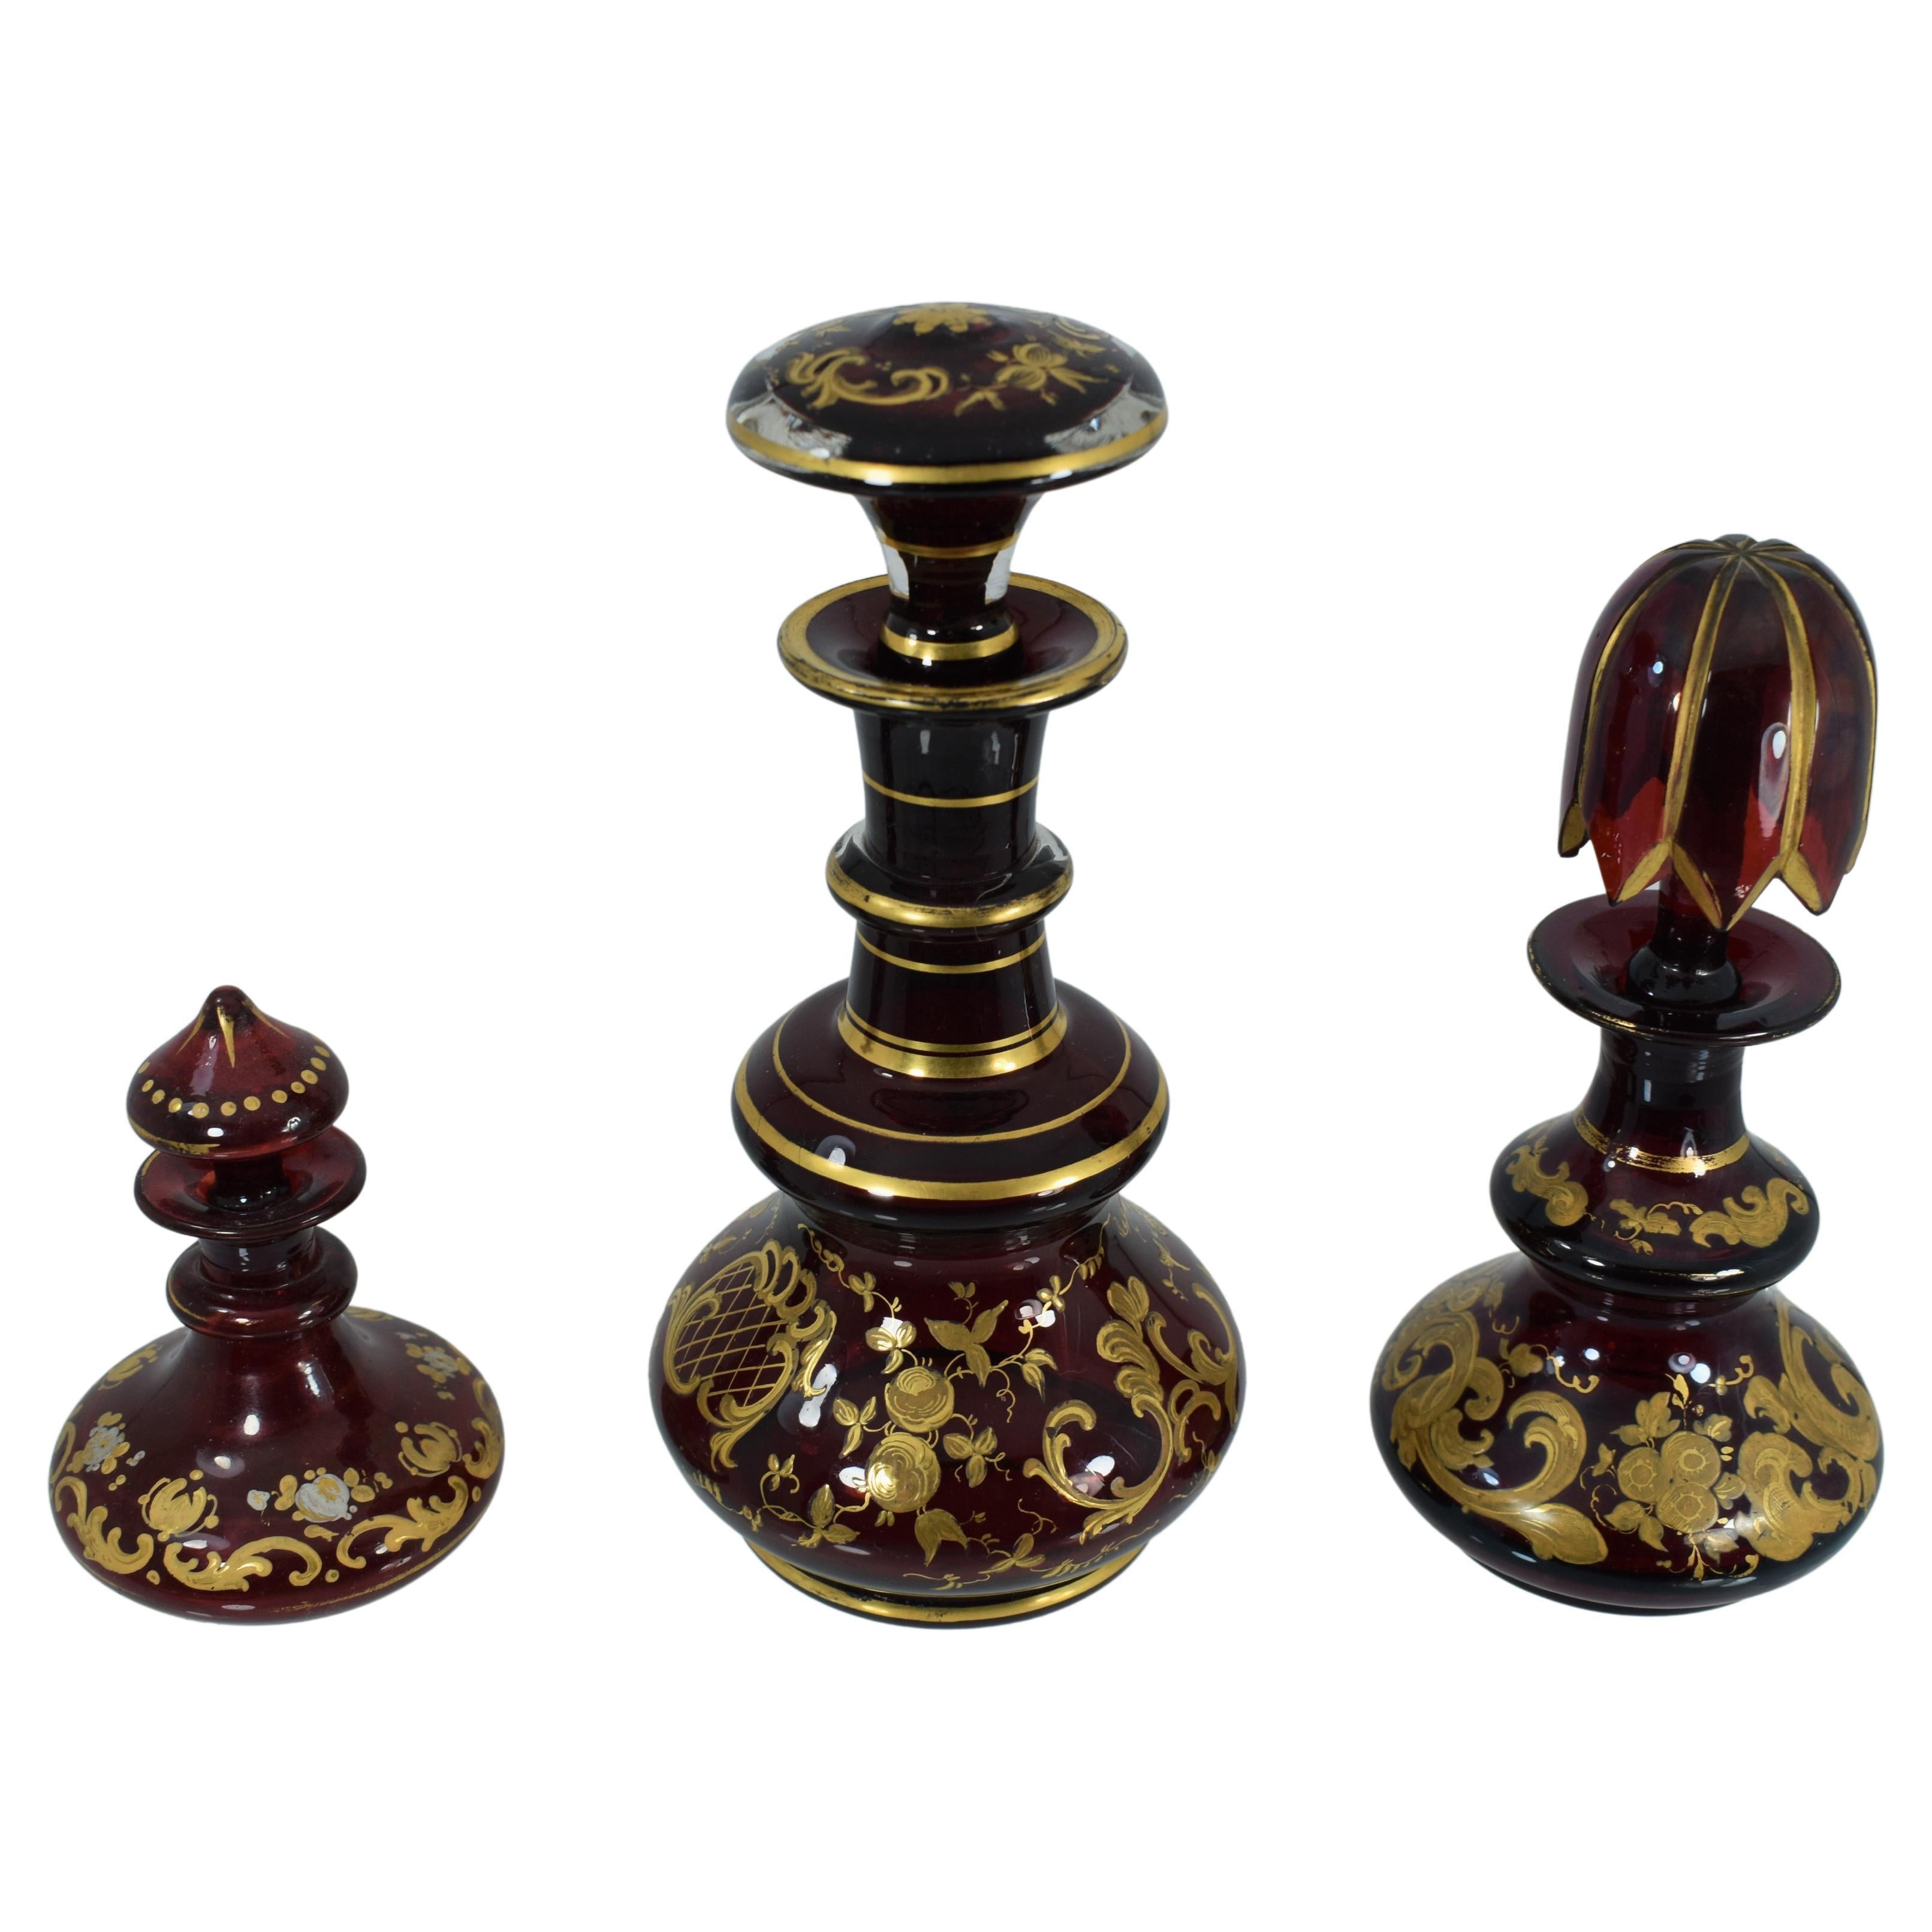 3 perfume bottles (flacon) in ruby red blown glass, decorated all around with gilded enamel scrollworks and flowers
further gilding on the neck and stopper
Bohemia, 19th Century
Largest one is 18.5 cm high.